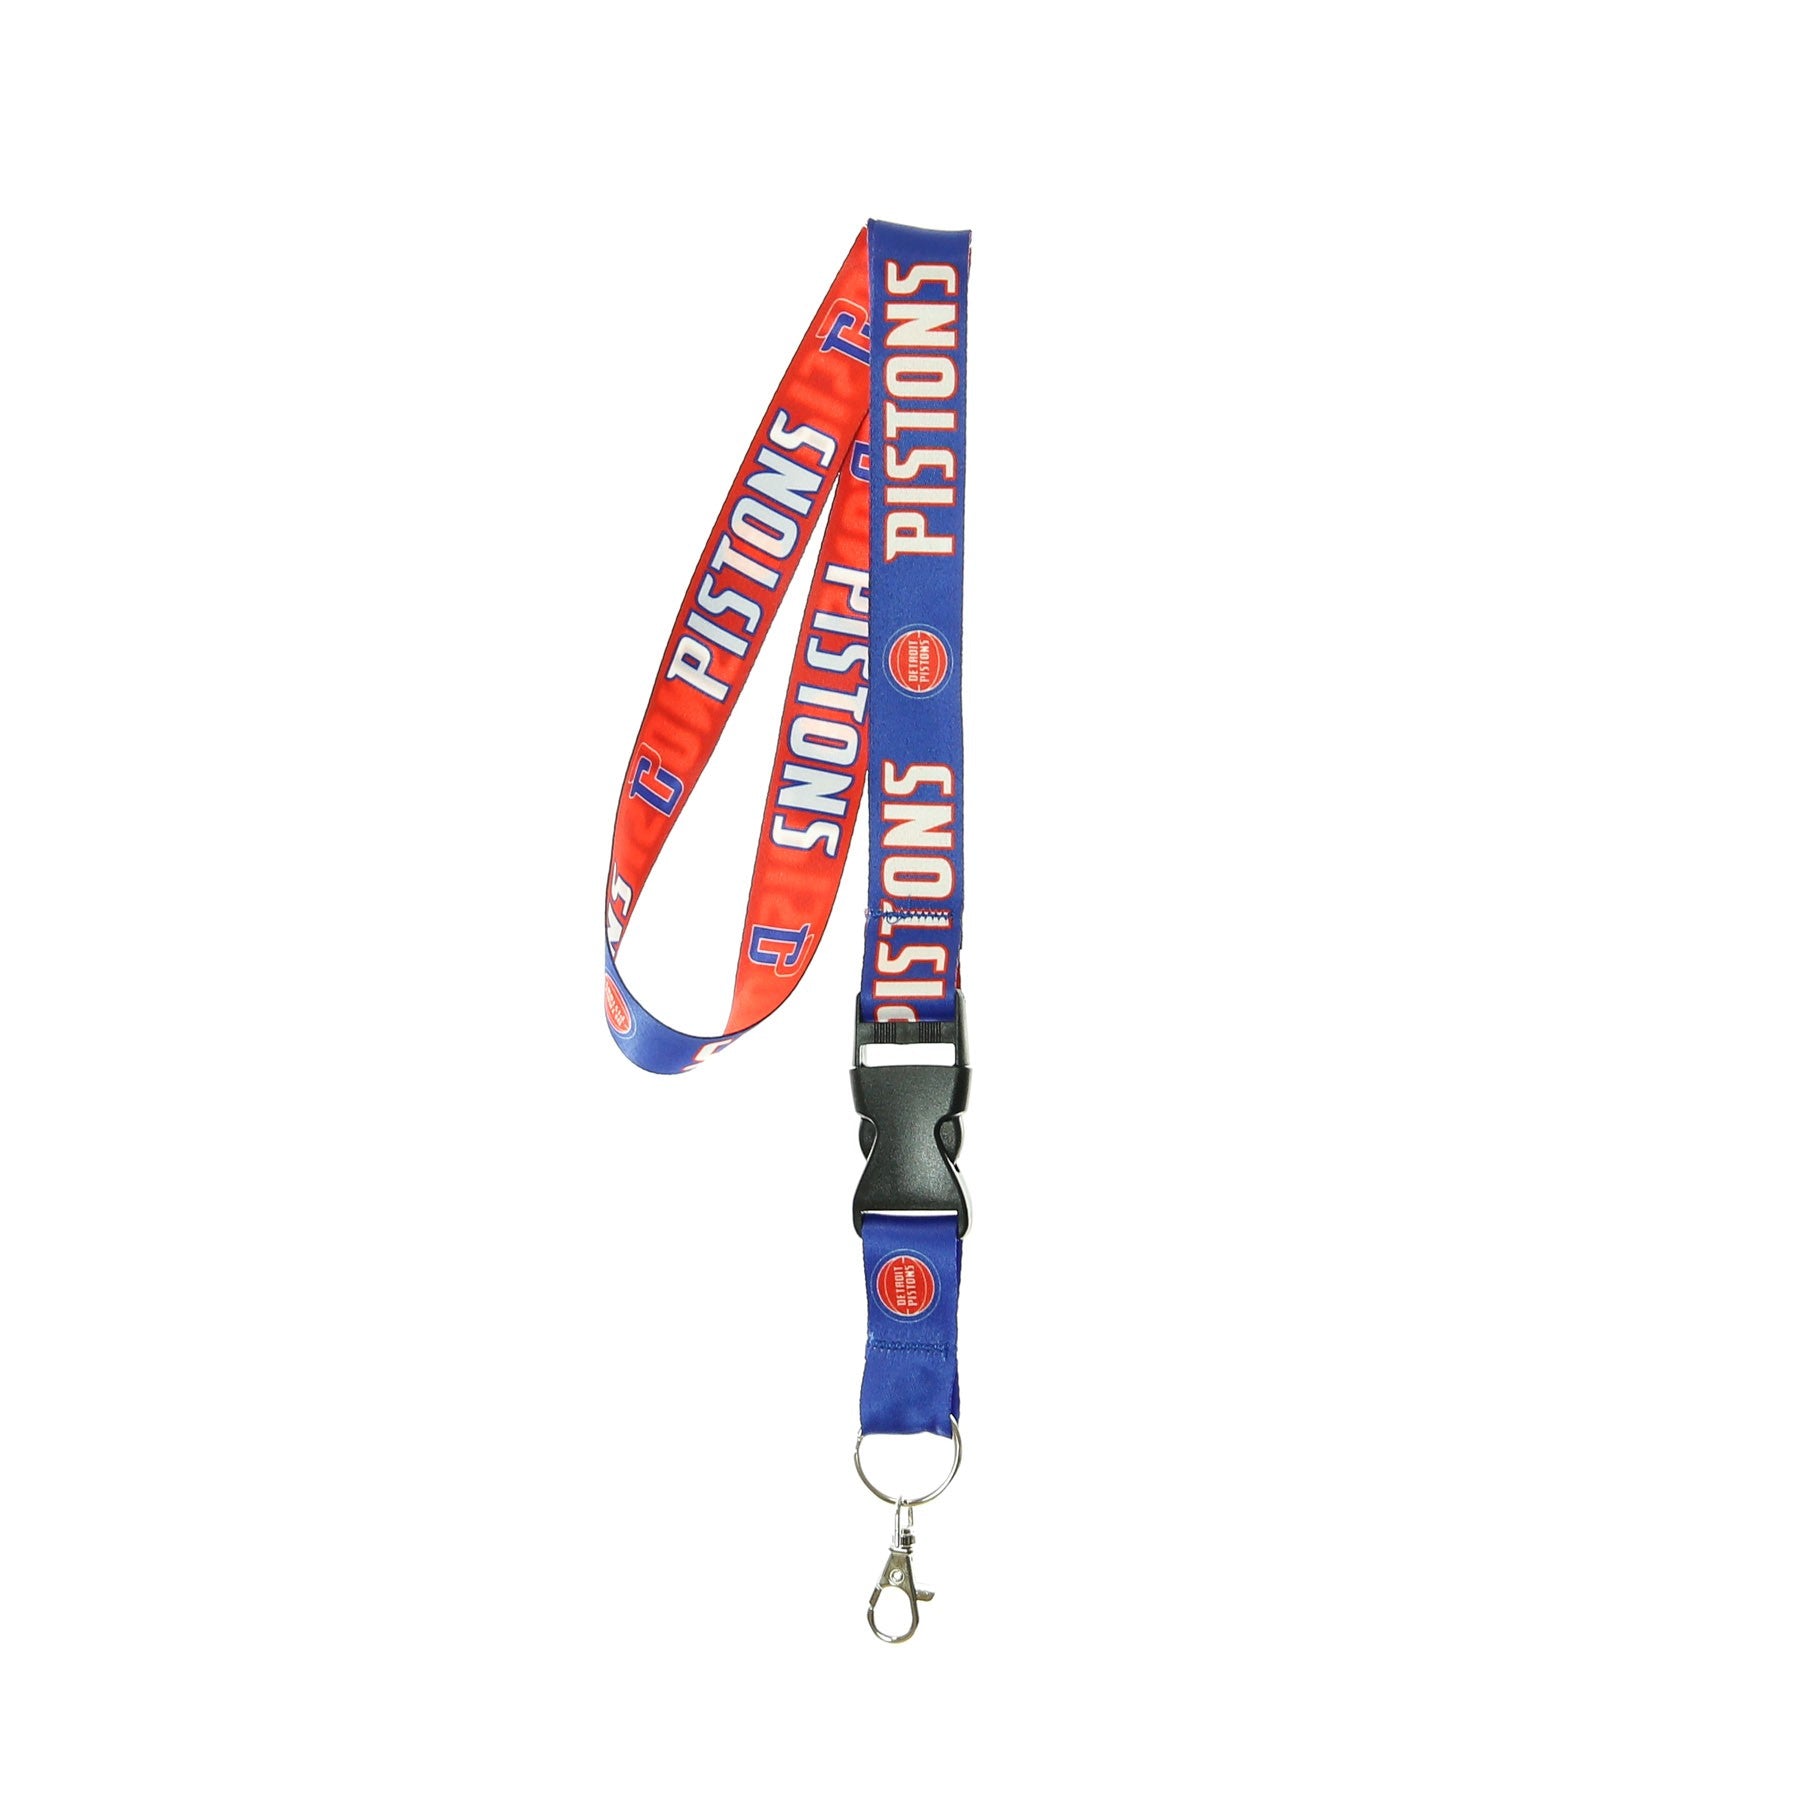 Unisex Nba Lanyard Keychain With Buckle Detpit Original Team Colors